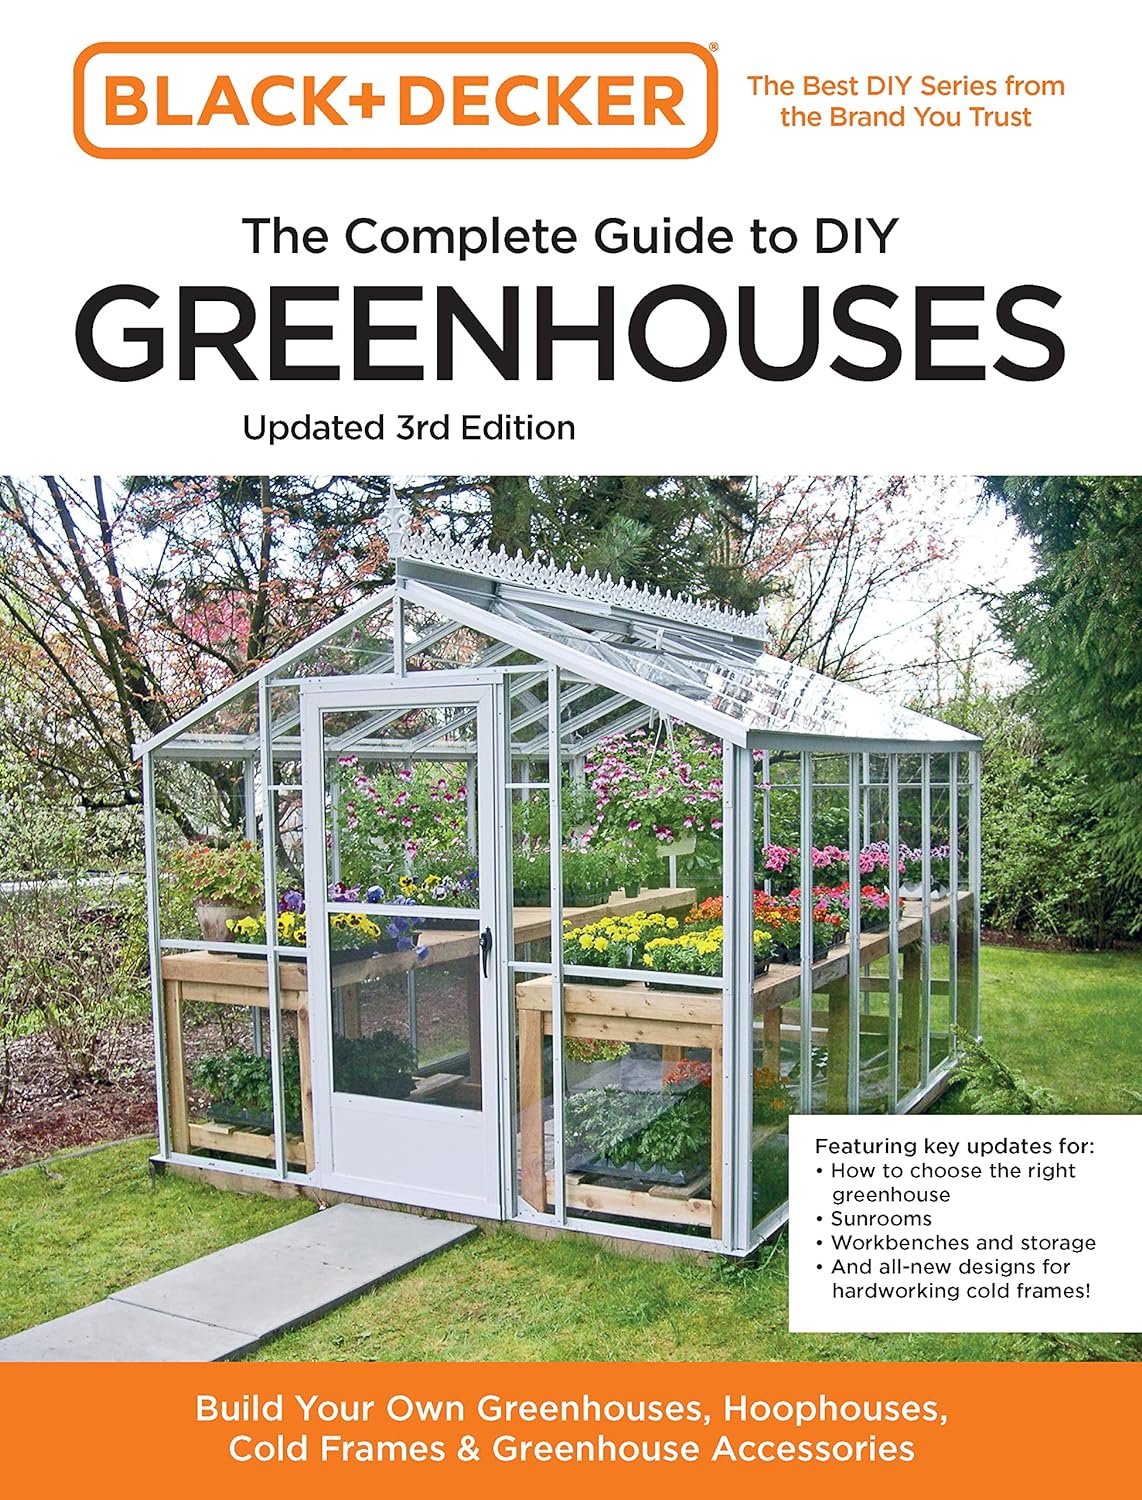 Time-Sensitive: Black and Decker The Complete Guide to DIY Greenhouses 3rd Edition - Hot Savings Alert - Shop Now for the Best Deals!